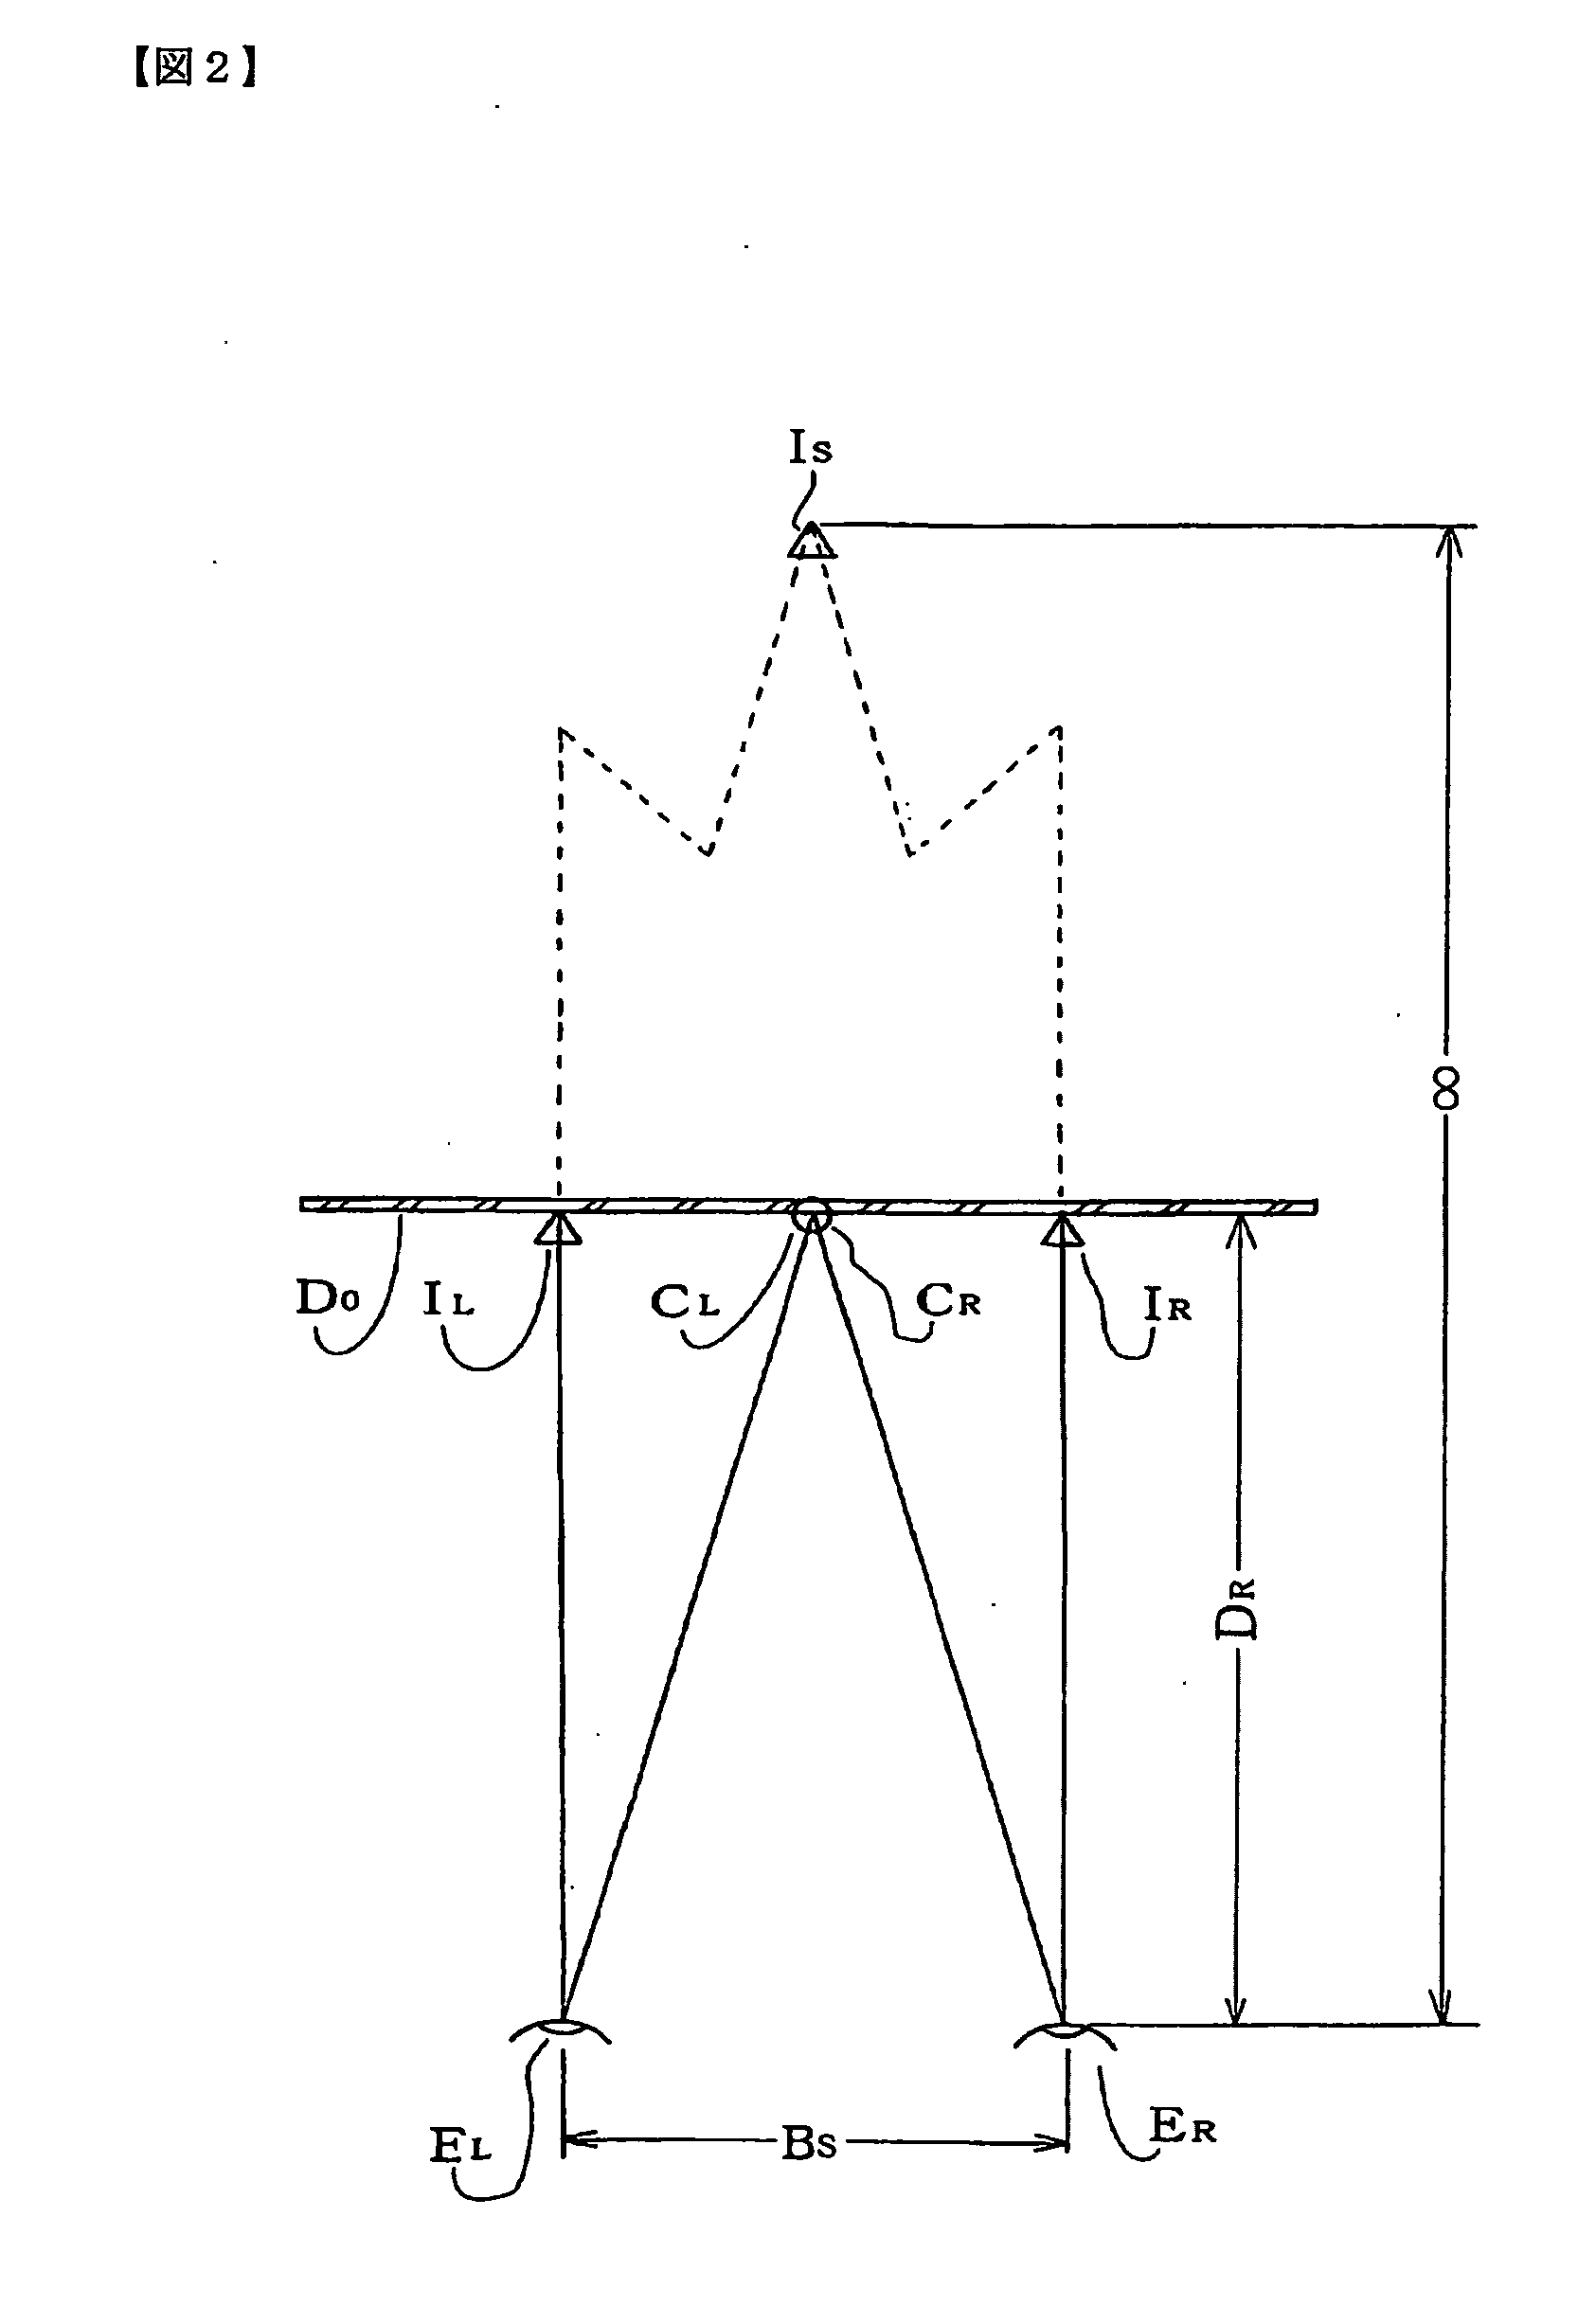 Three-dimensional television system, three-dimensional television television receiver and three-dimensional image watching glasses